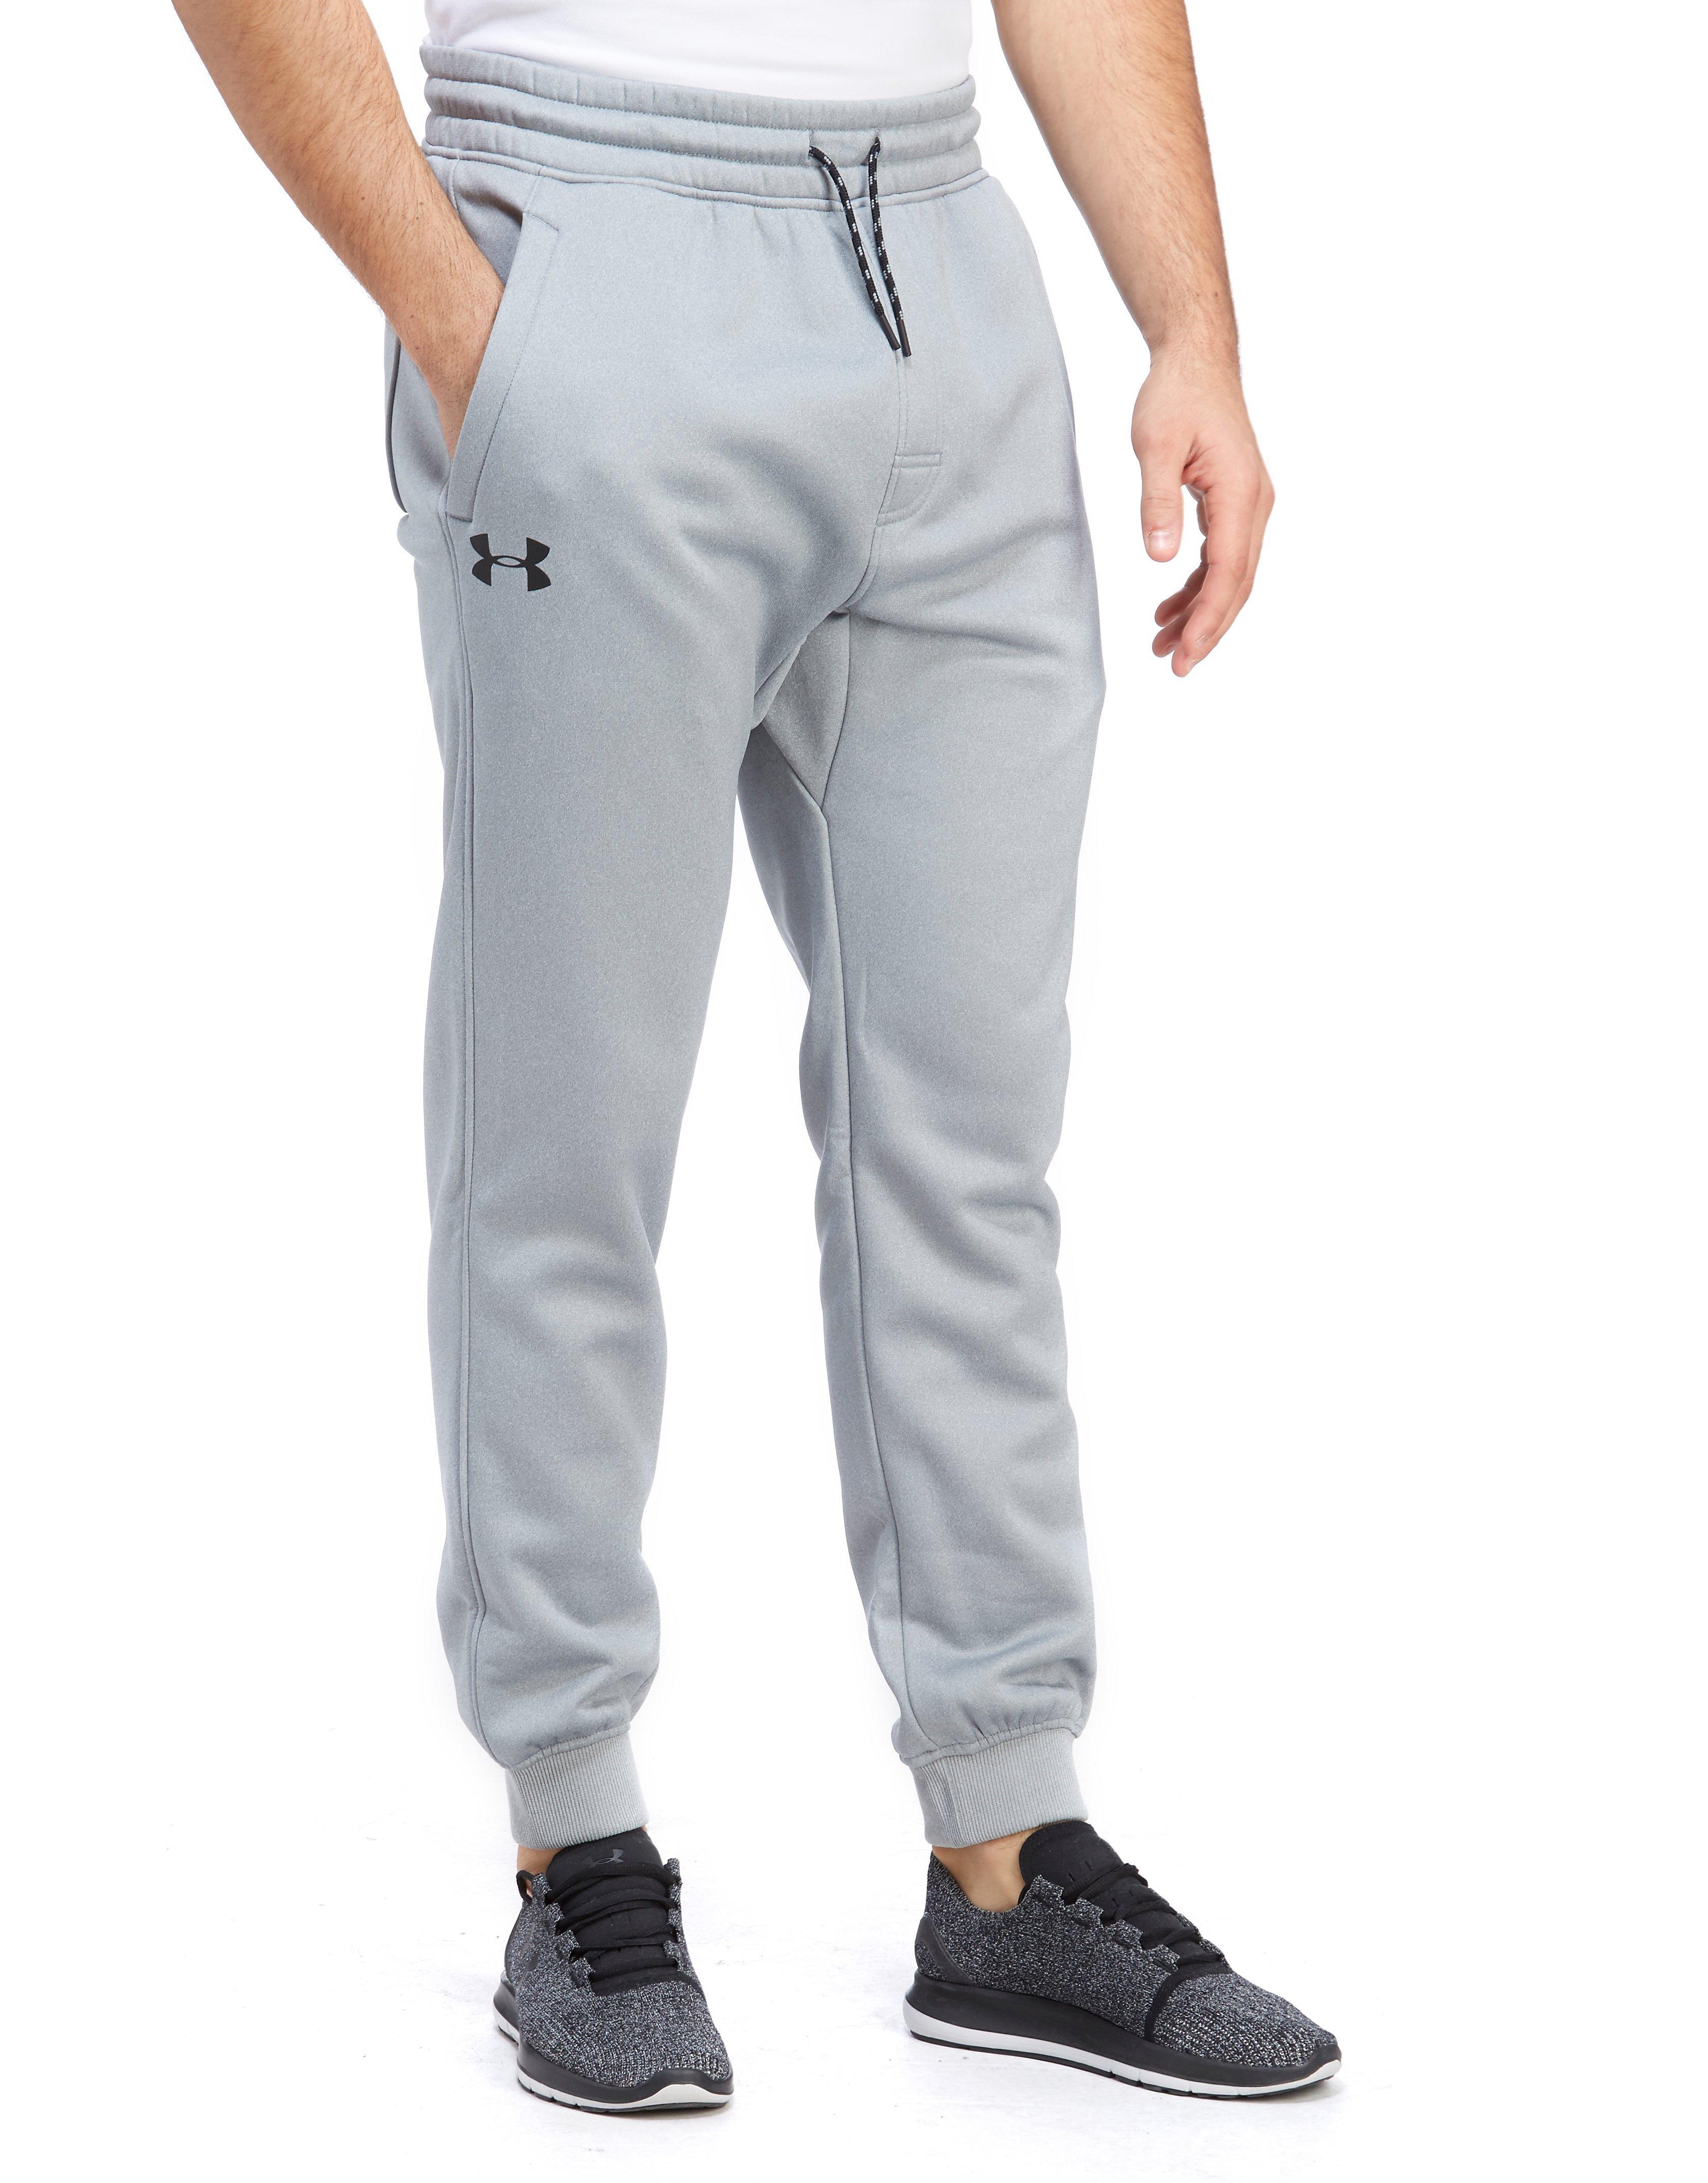 Under Armour Fleece Icon Track Pants in Gray for Men - Lyst